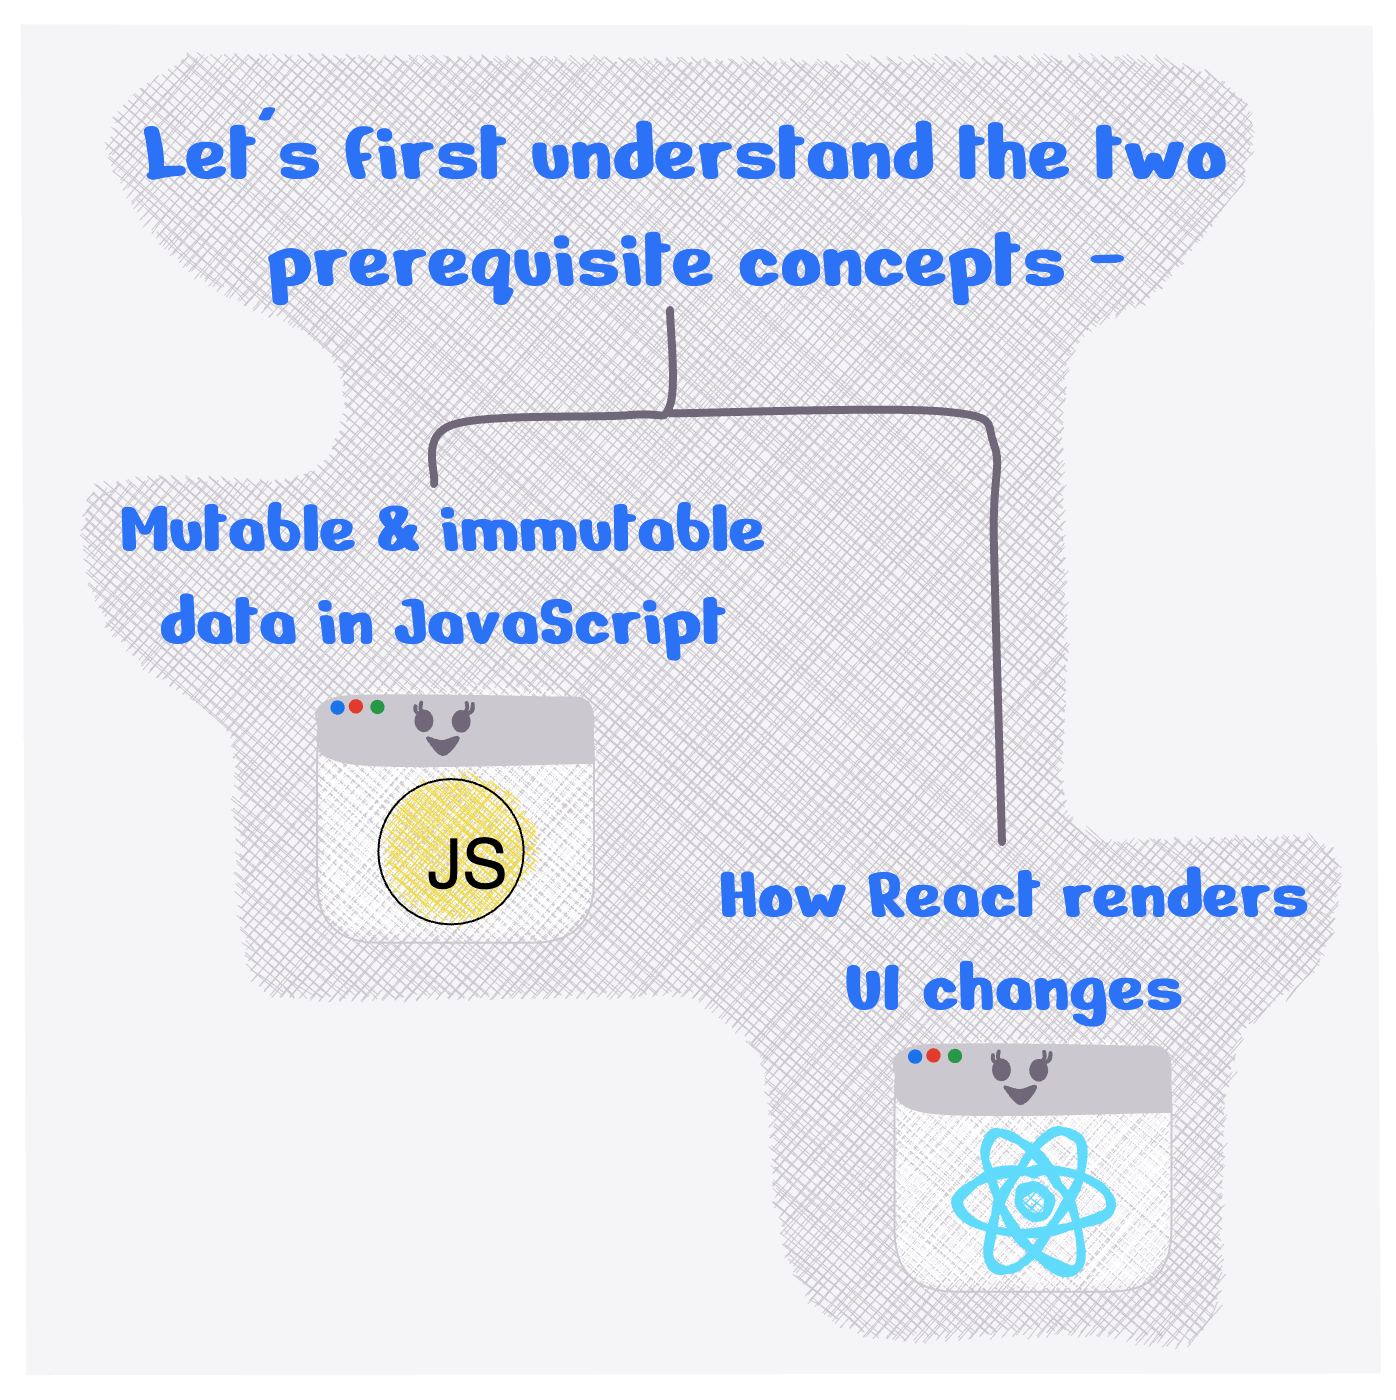 Lets first understand the two pre-requisite concepts - 1. Mutable & immutable data in JavaScript. 2. How React renders UI changes.